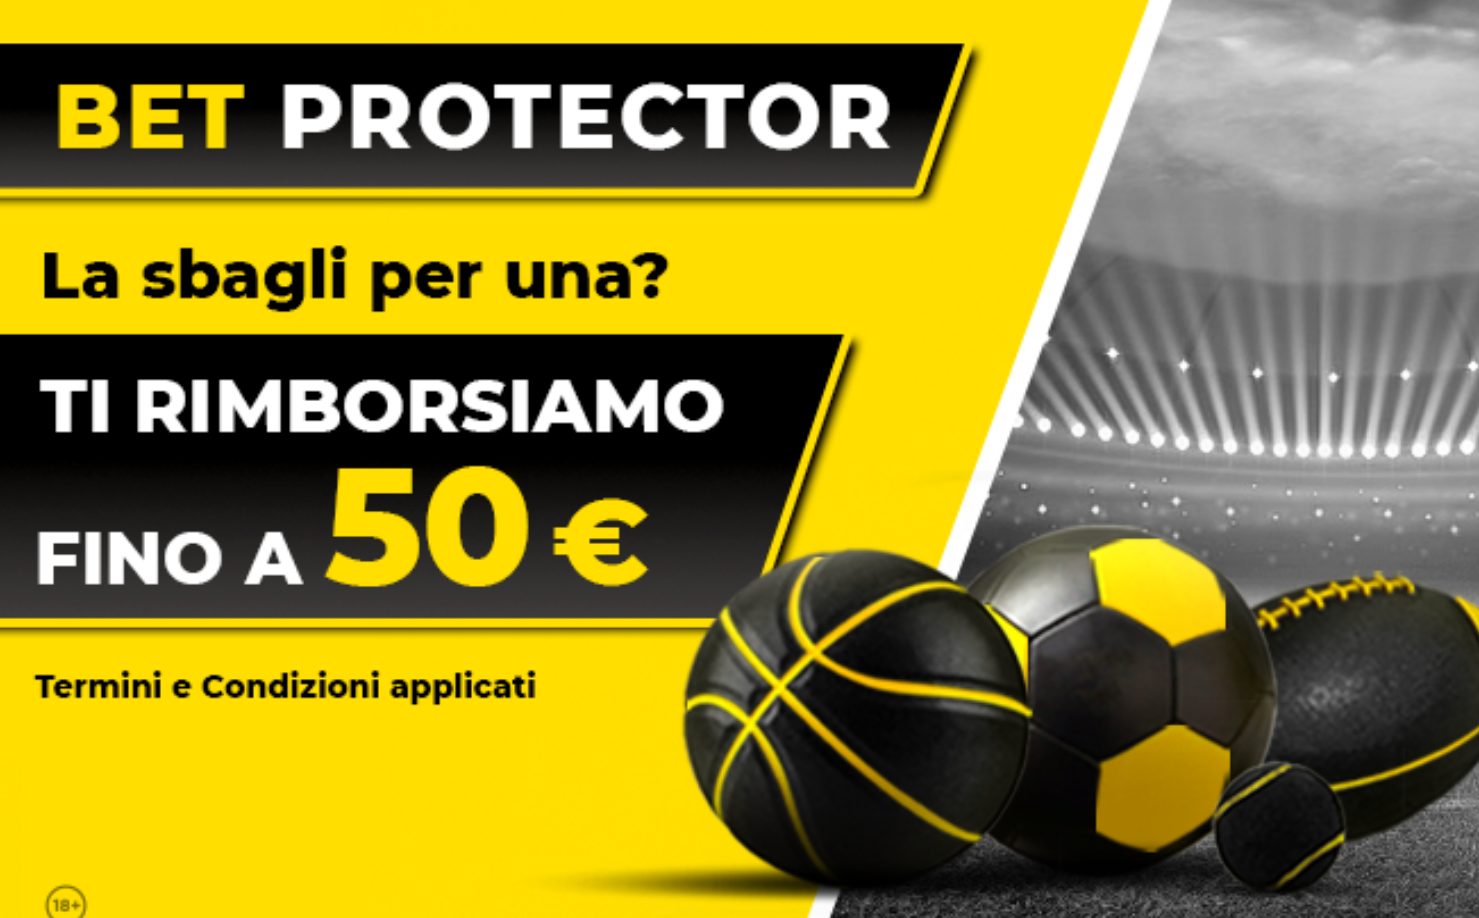 Promo Bet Protector